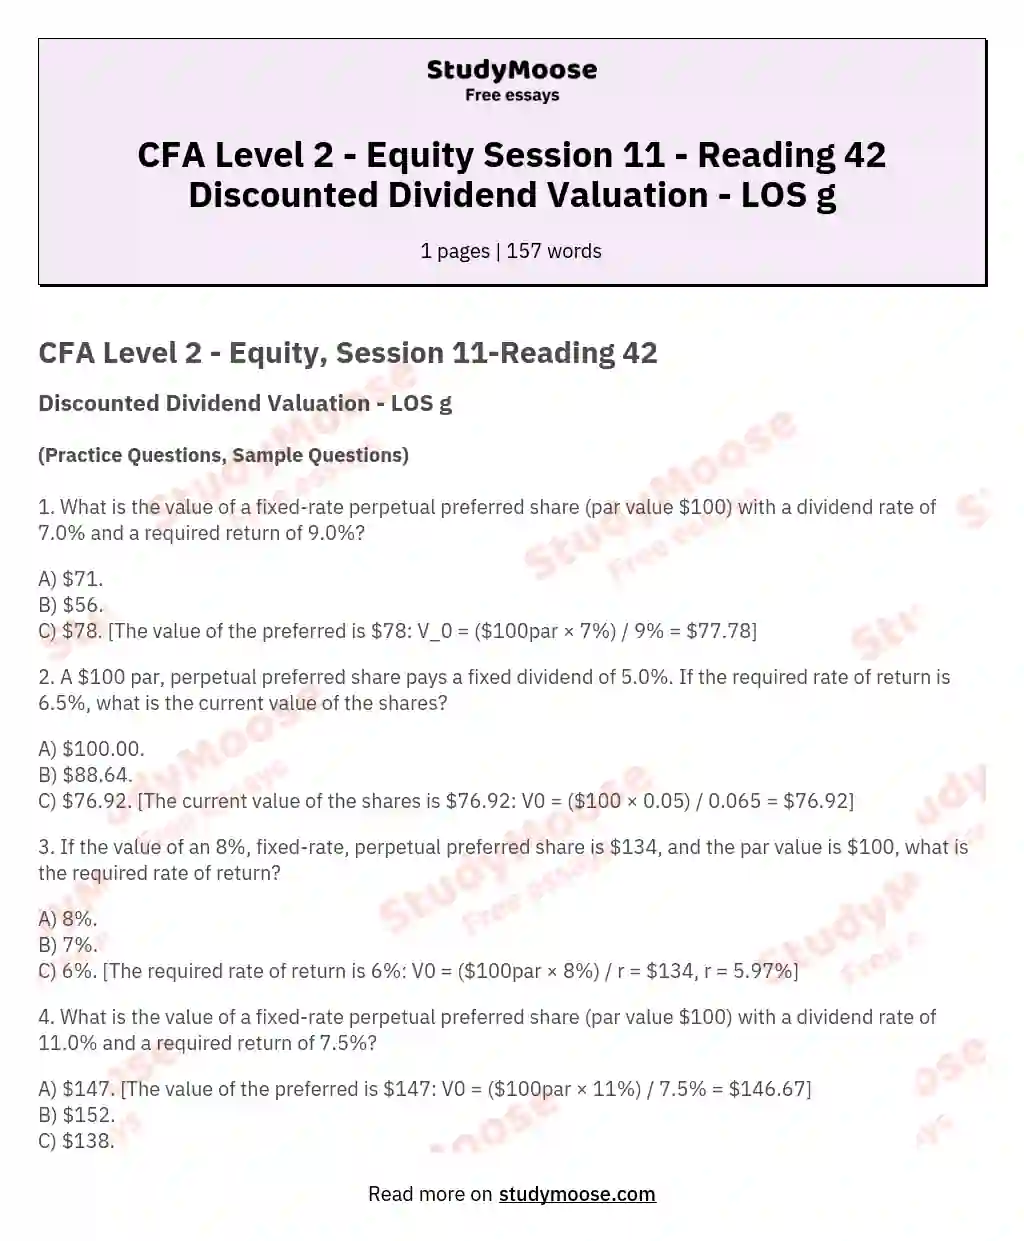 CFA Level 2 - Equity Session 11 - Reading 42 Discounted Dividend Valuation - LOS g essay